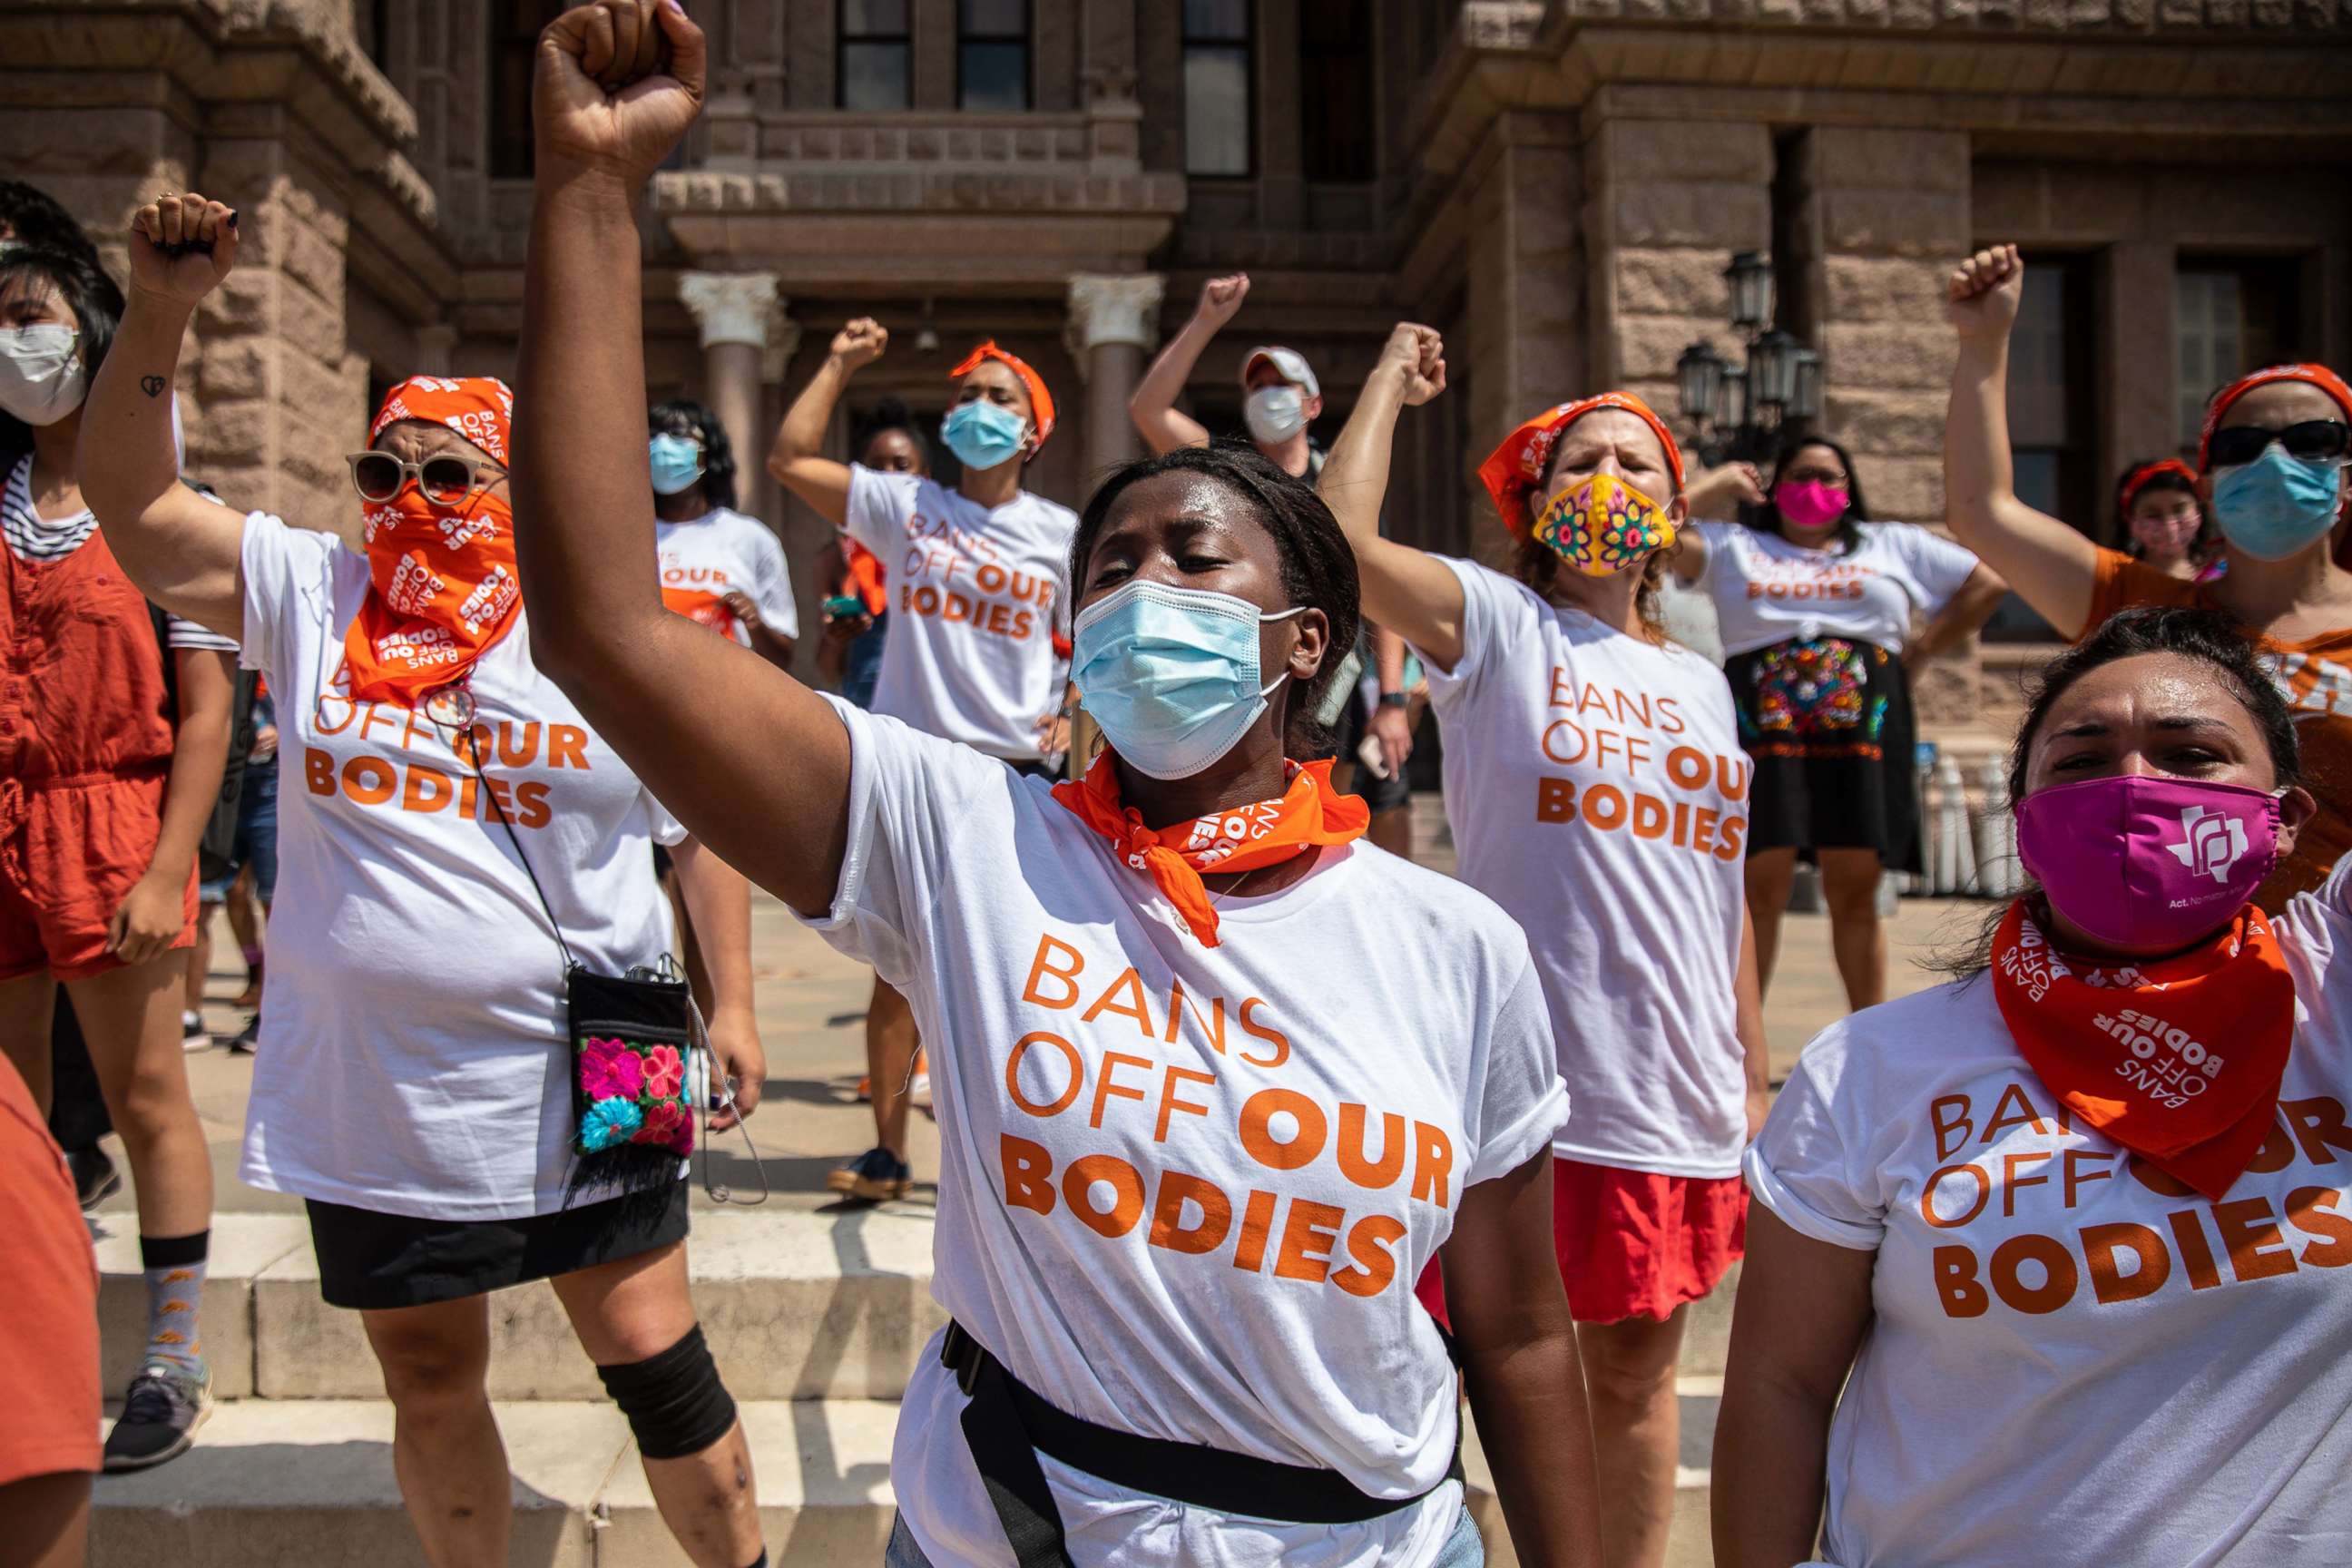 PHOTO: A Bans Off Our Bodies protest at the Texas State Capitol in Austin, Texas, Sept. 1, 2021.